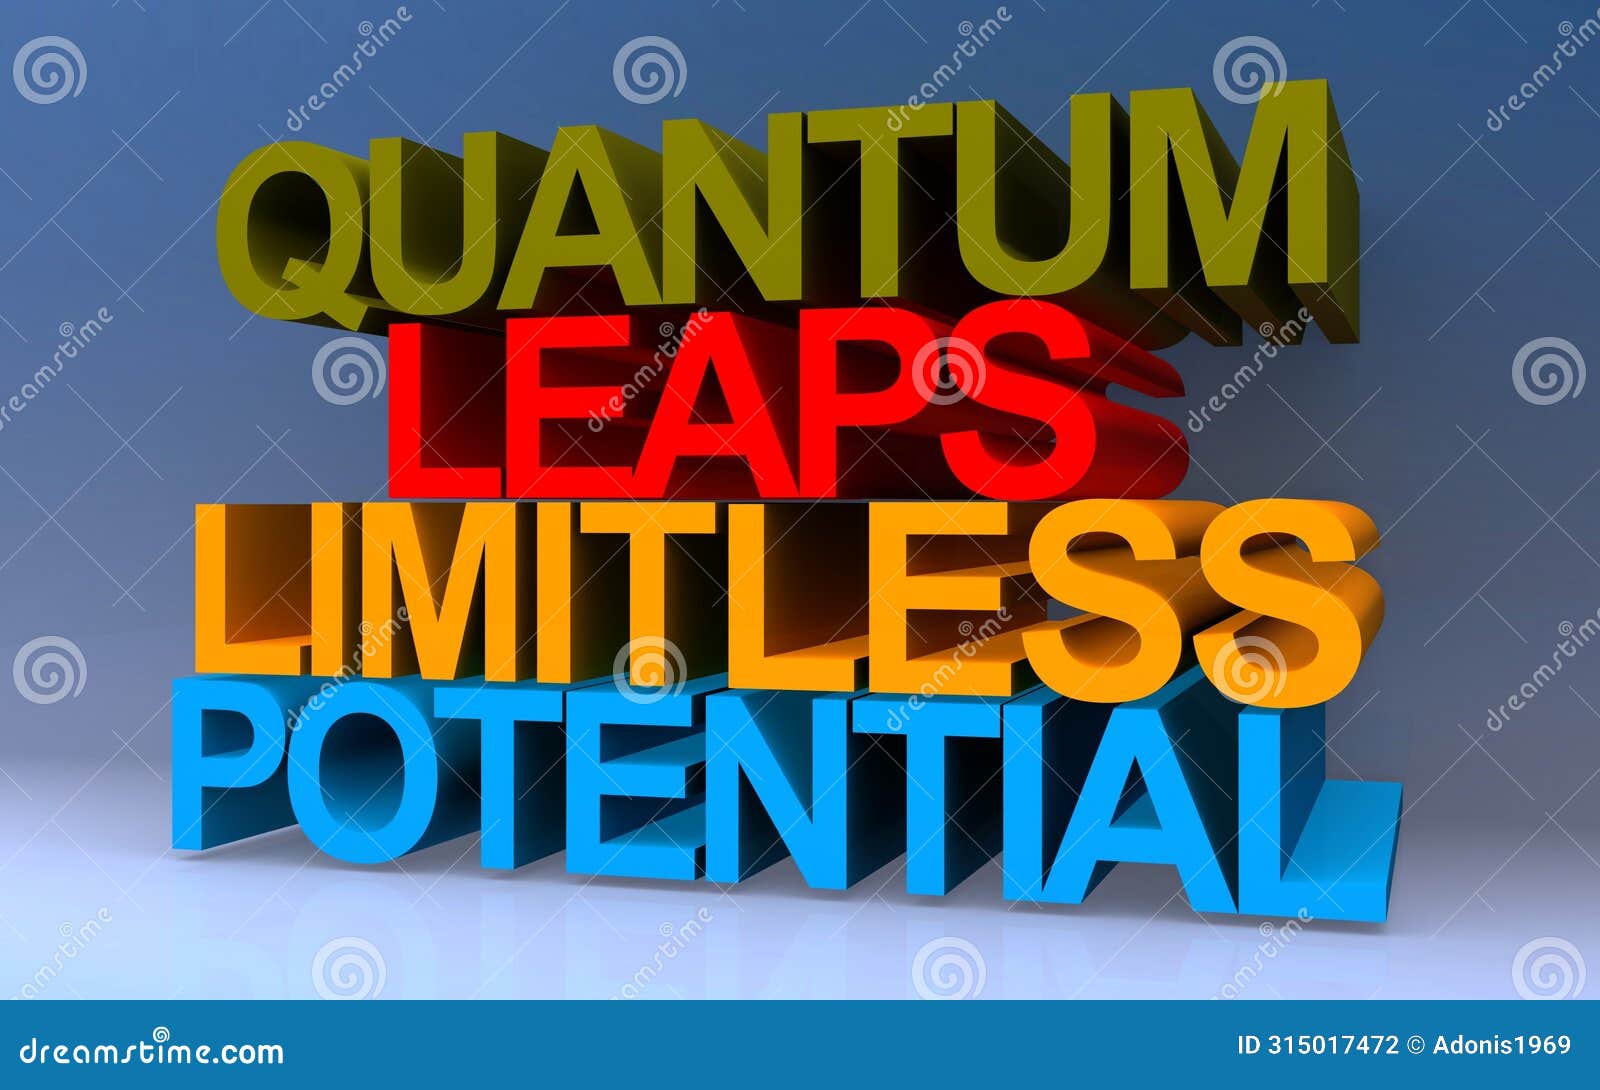 quantum leaps limitless potential on blue